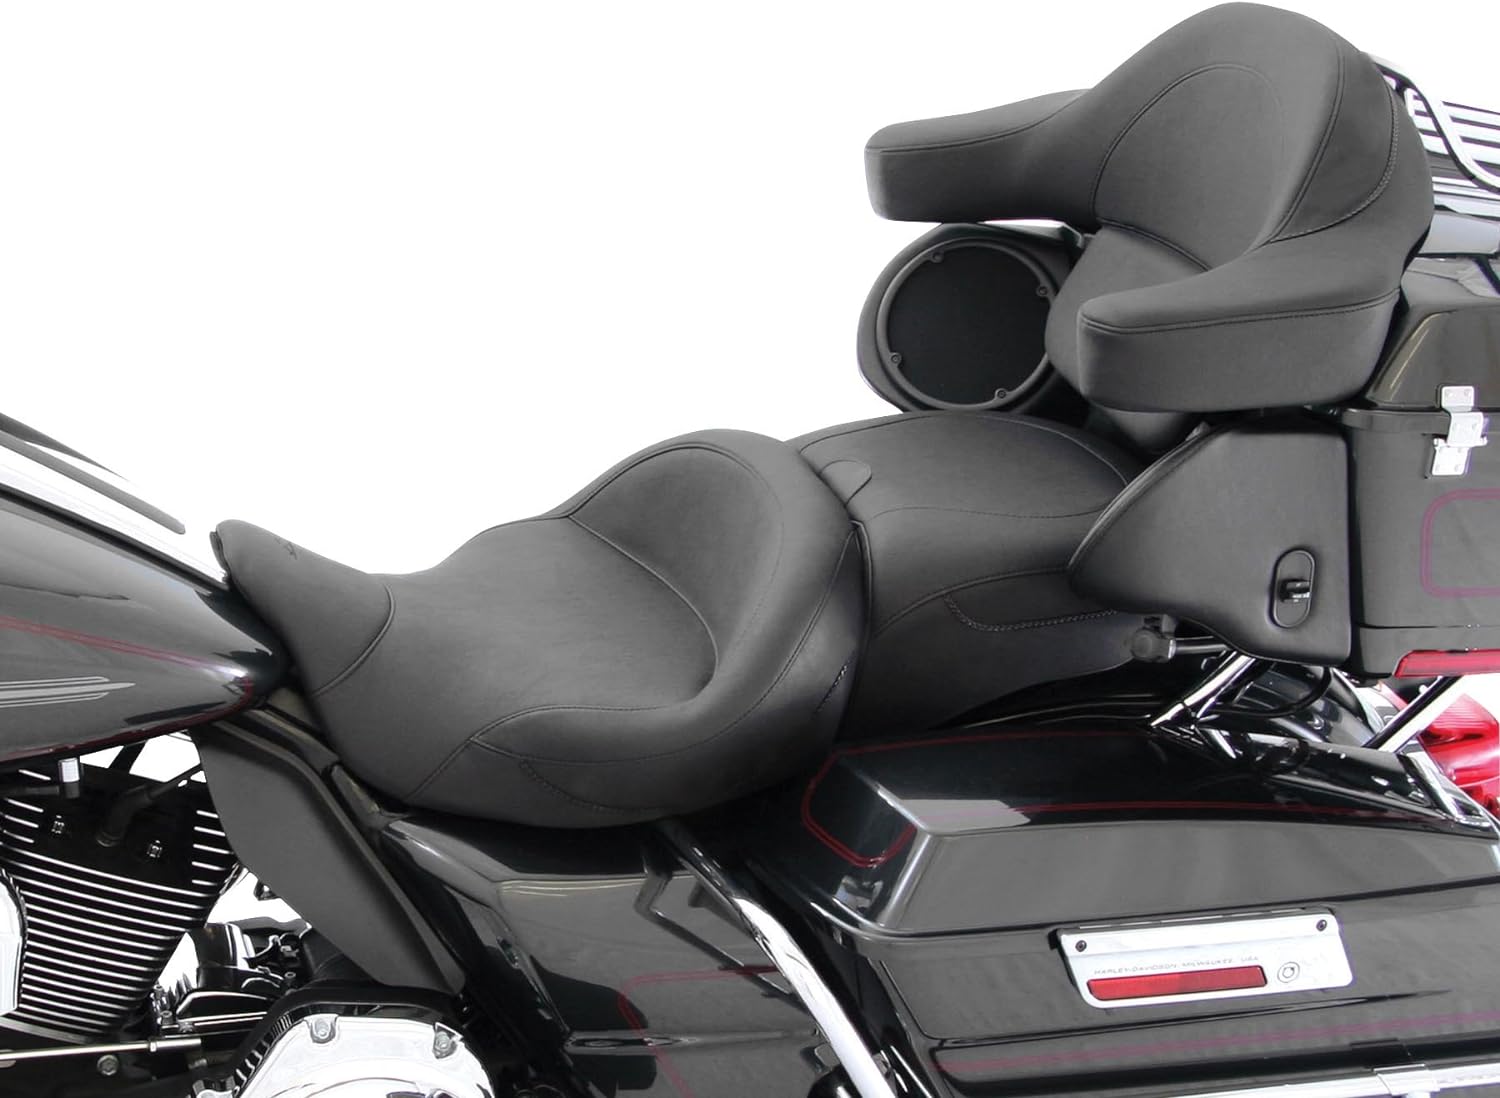 Mustang Motorcycle Seats 79006 Super Touring Deluxe One-Piece Seat Review